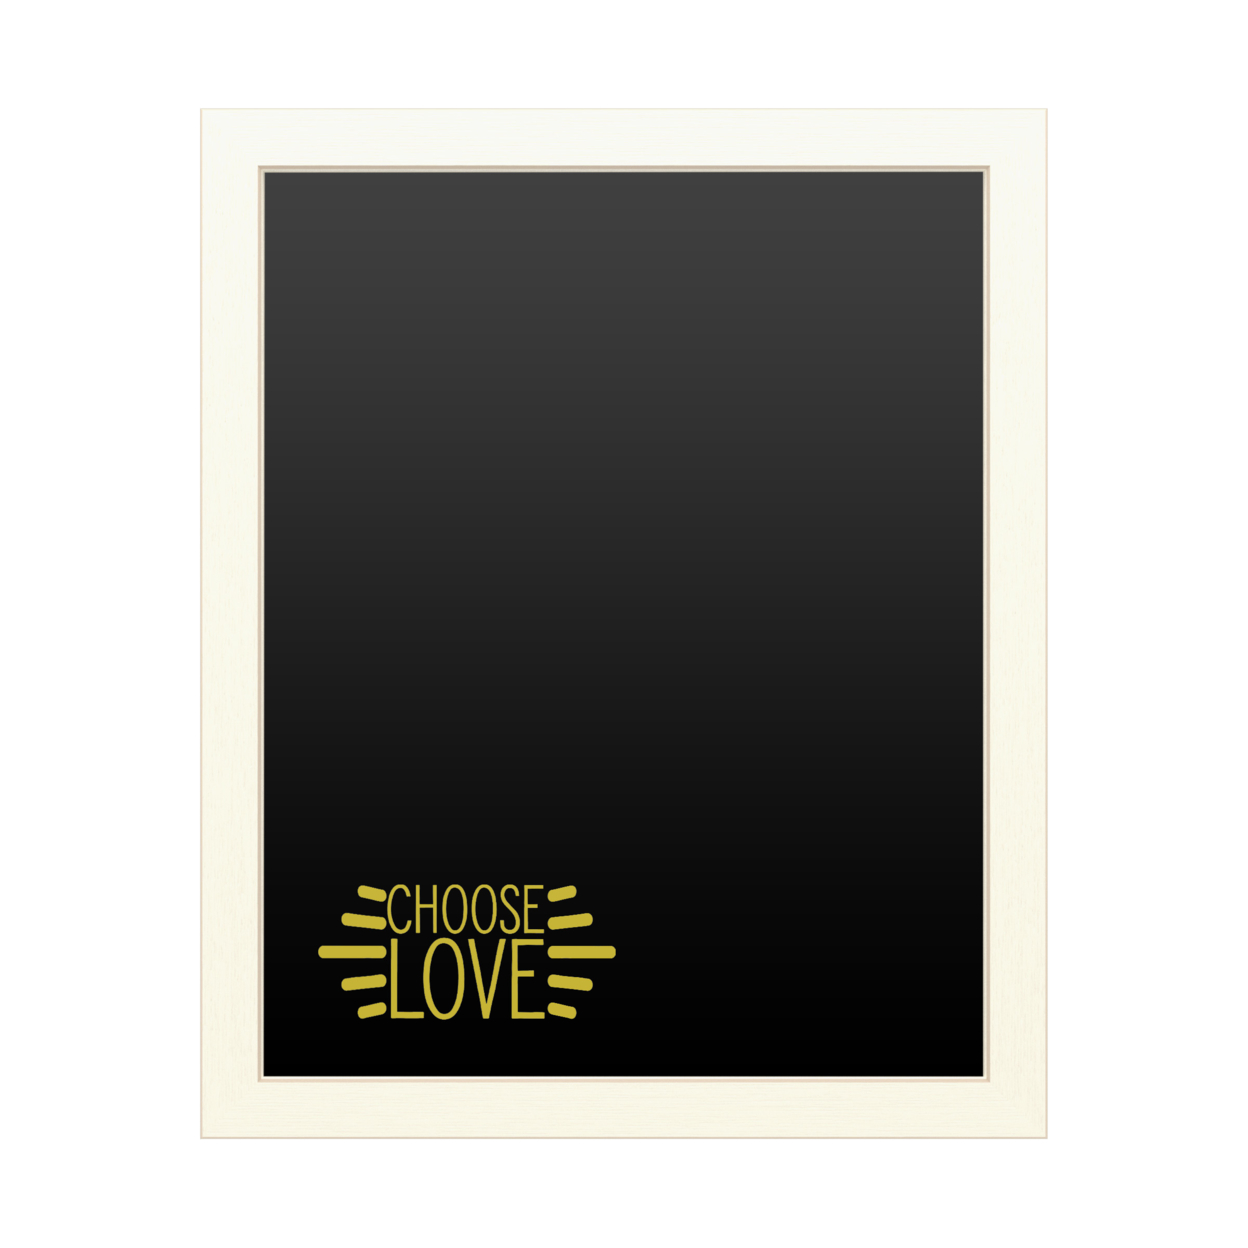 16 X 20 Chalk Board With Printed Artwork - Choose Love 2 White Board - Ready To Hang Chalkboard